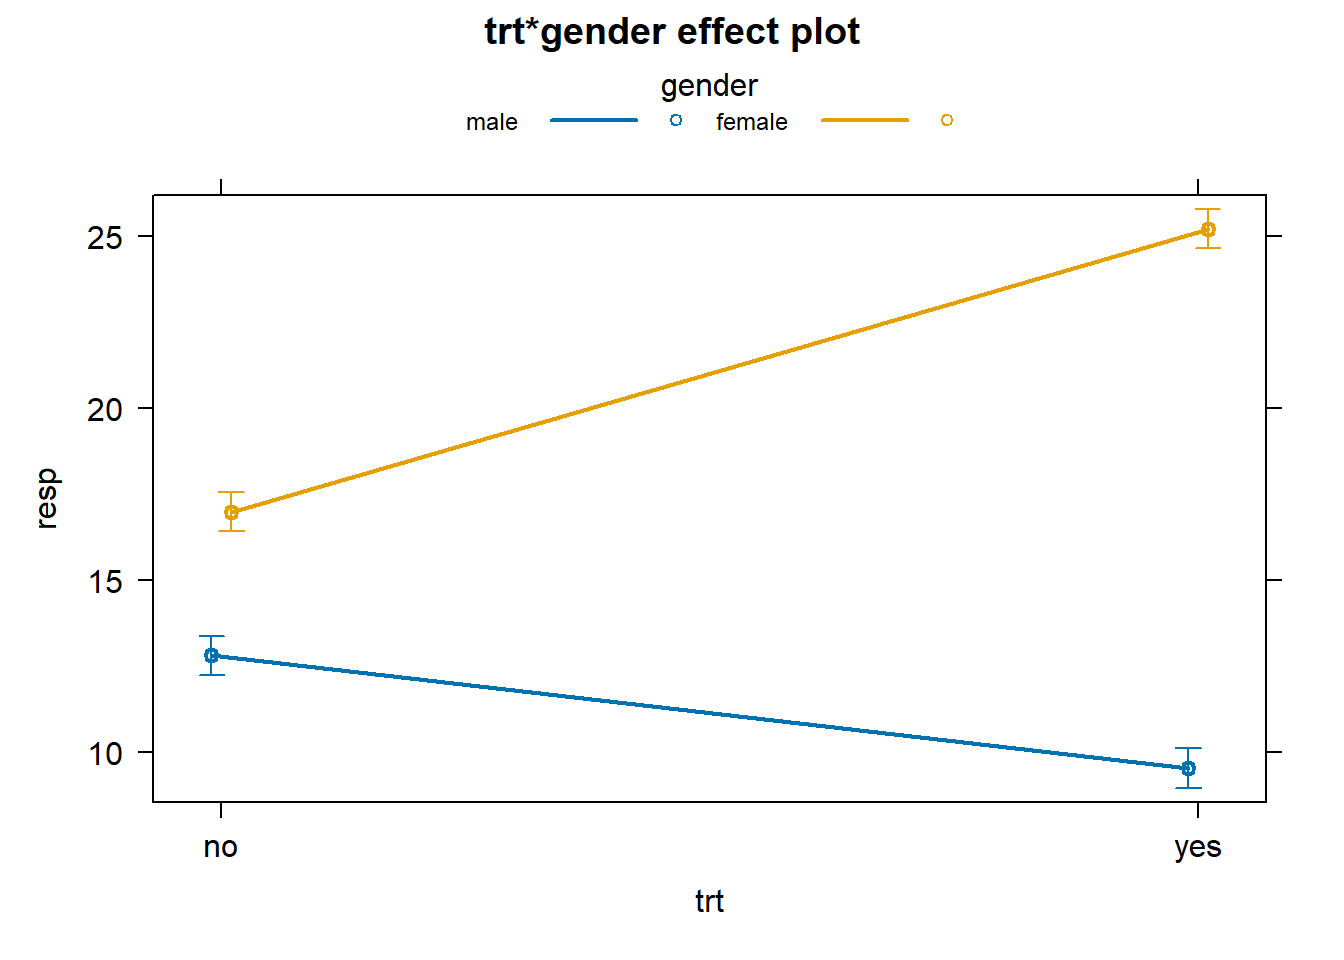 Effect plot of treatment and gender interaction.